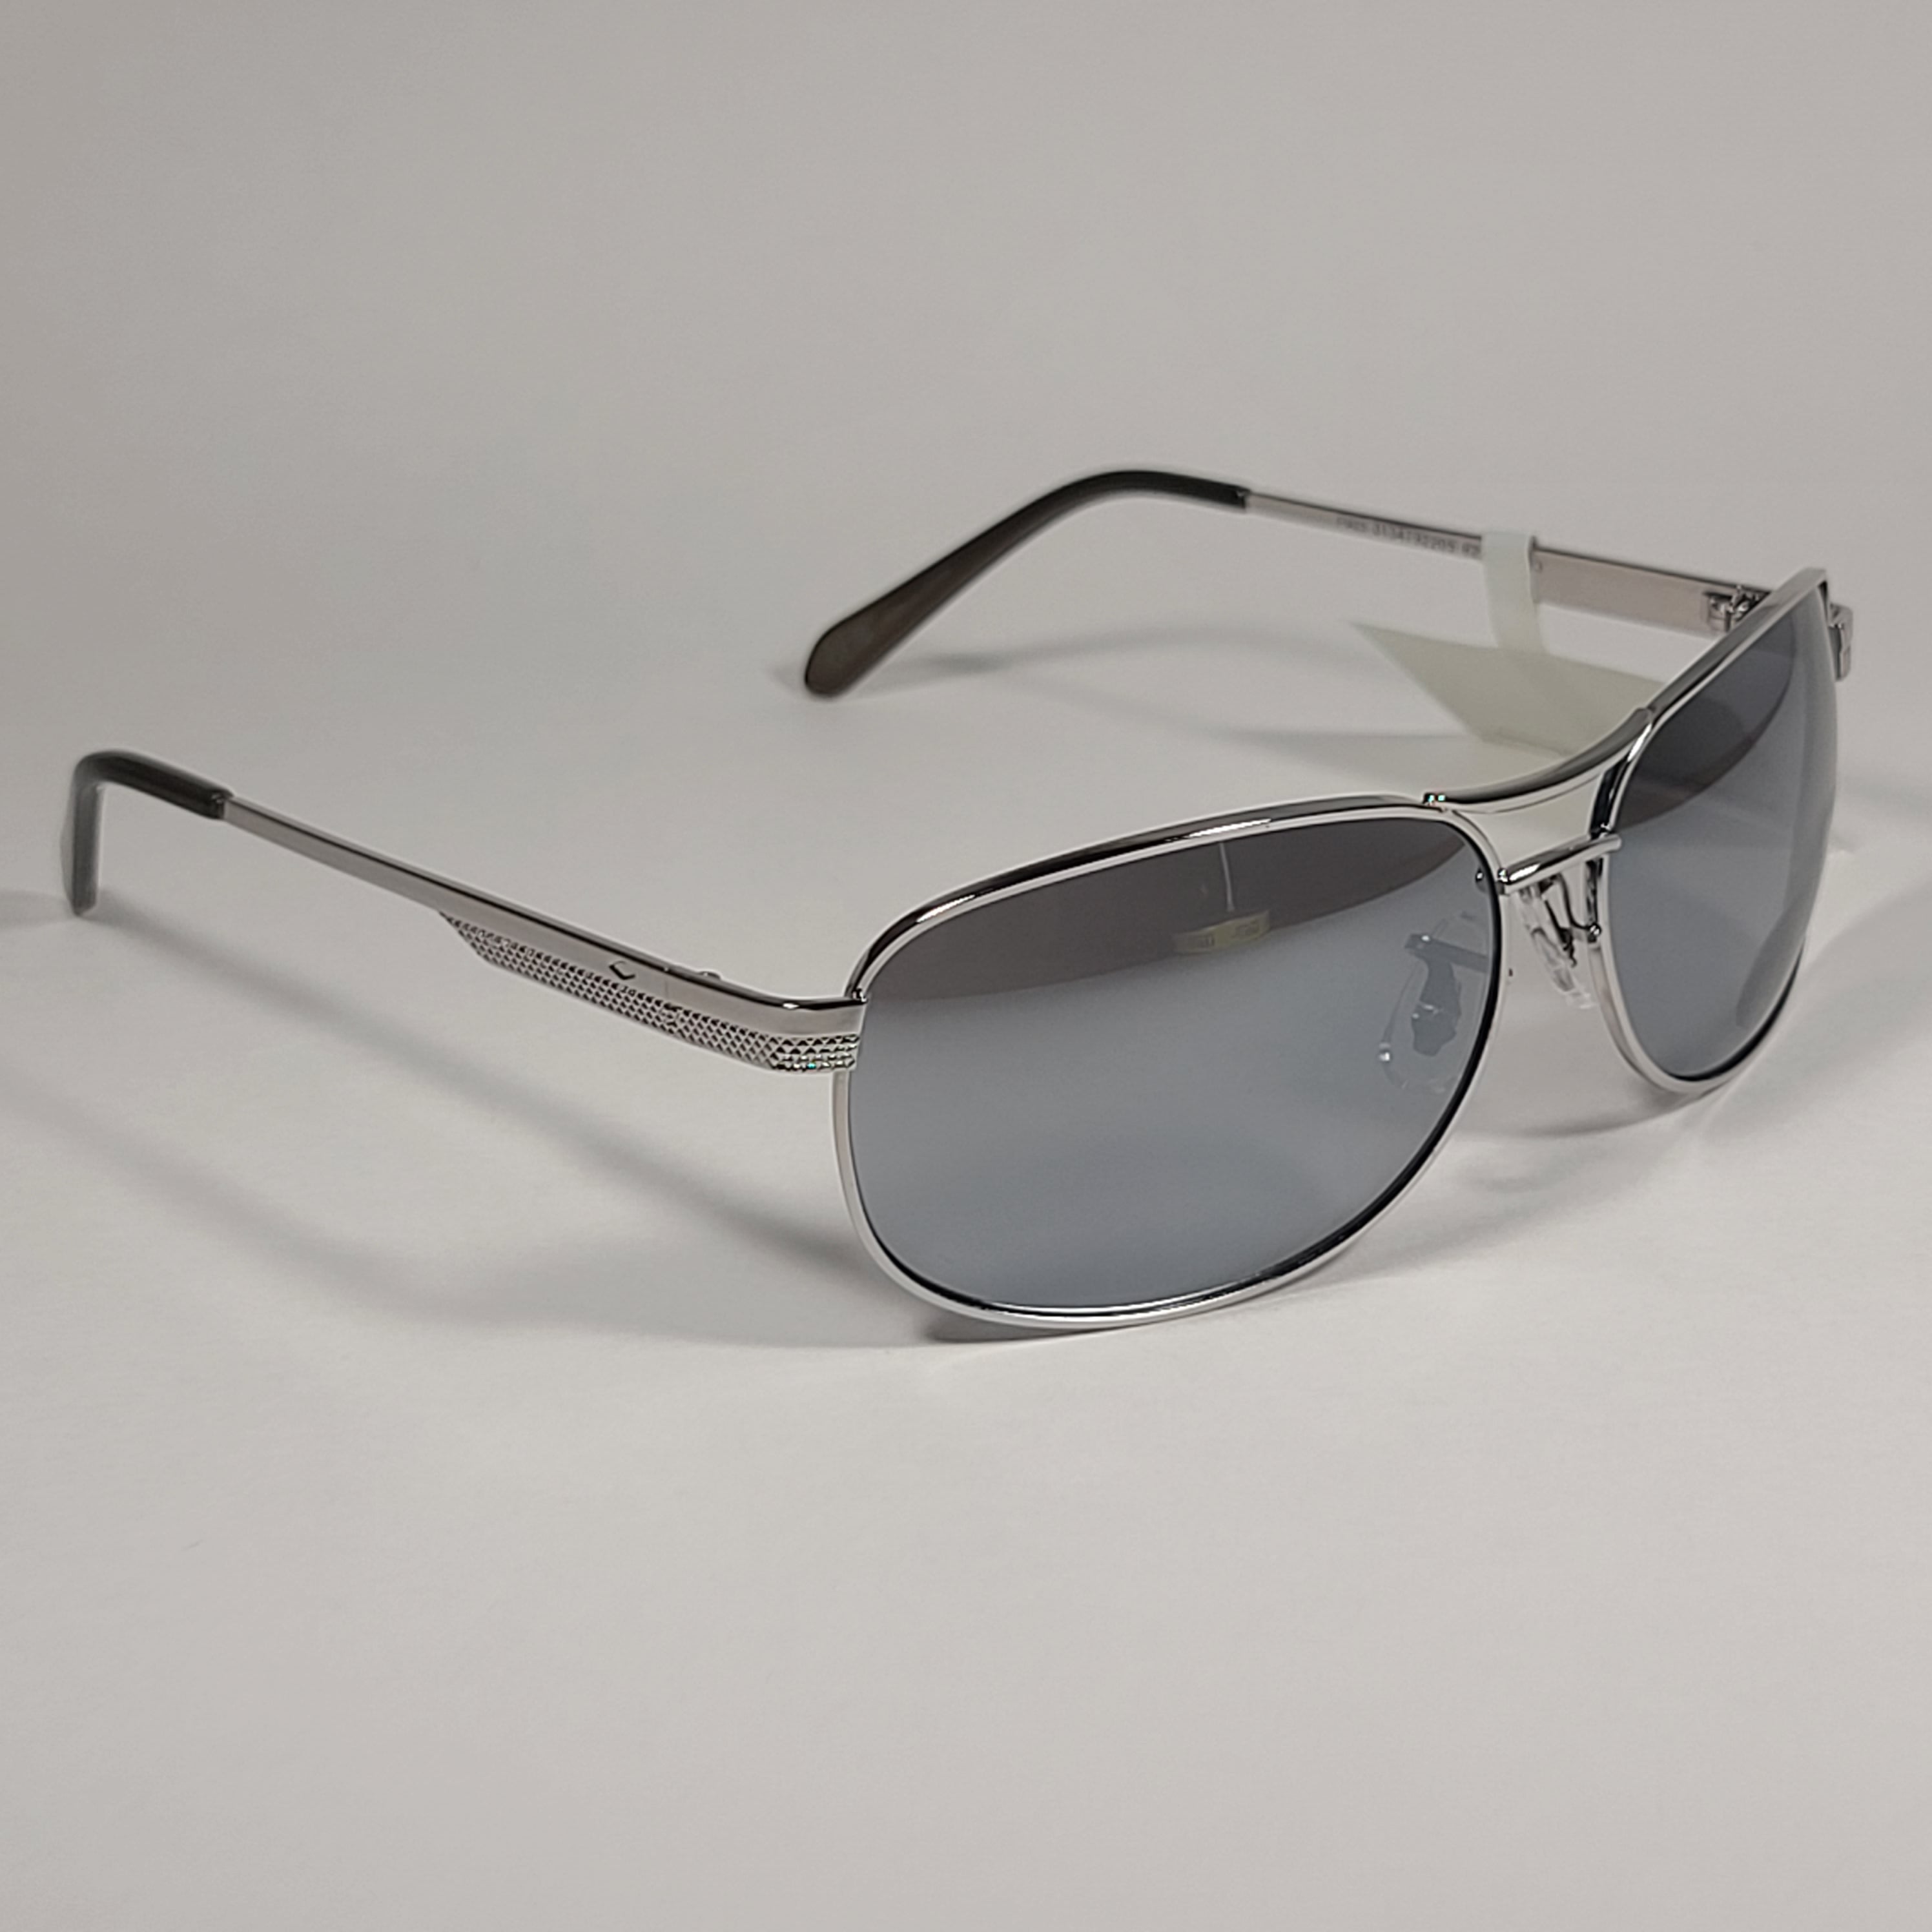 Vintage Ray-Ban Sunglasses For Men and Women - Page 24